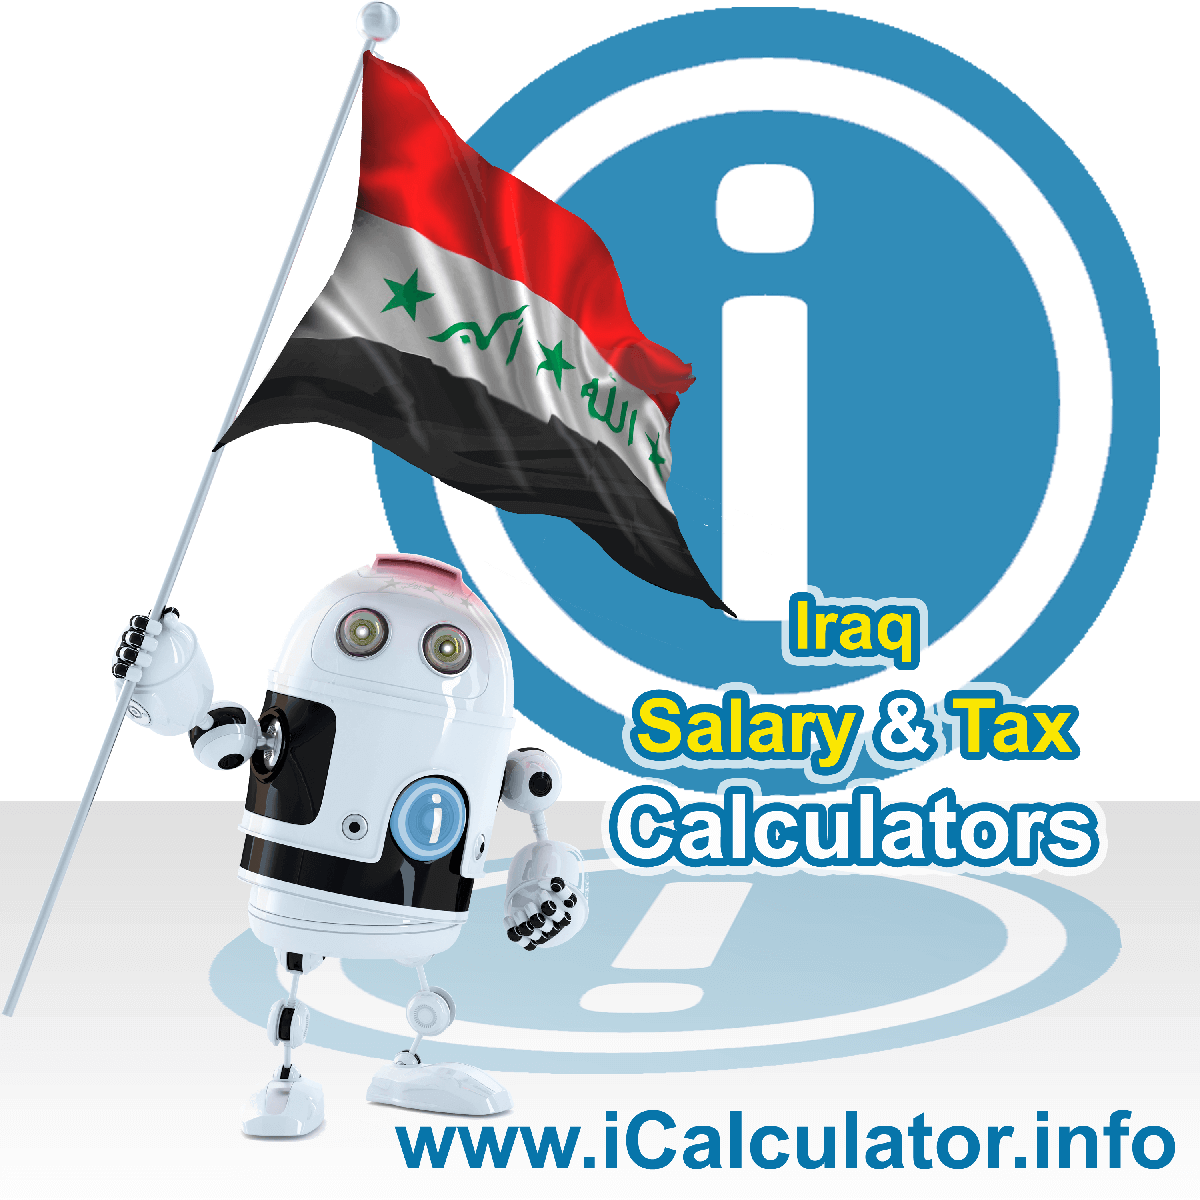 Iraq Tax Calculator. This image shows the Iraq flag and information relating to the tax formula for the Iraq Salary Calculator